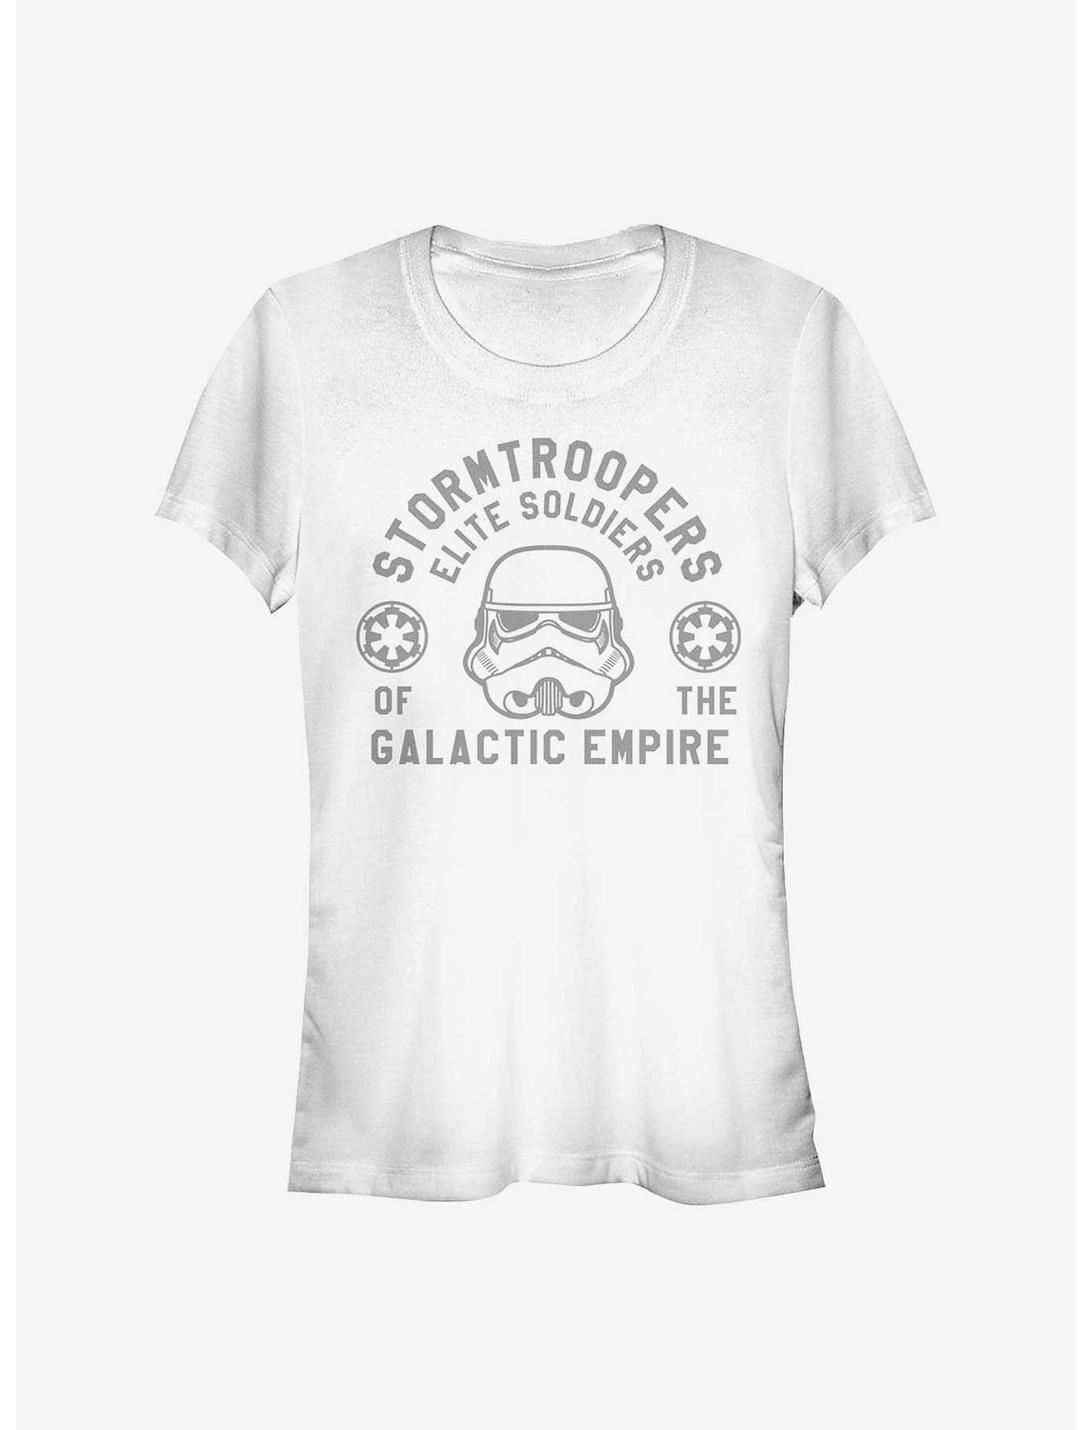 Star Wars Rogue One: A Star Wars Story Elite Troop Girls T-Shirt, WHITE, hi-res